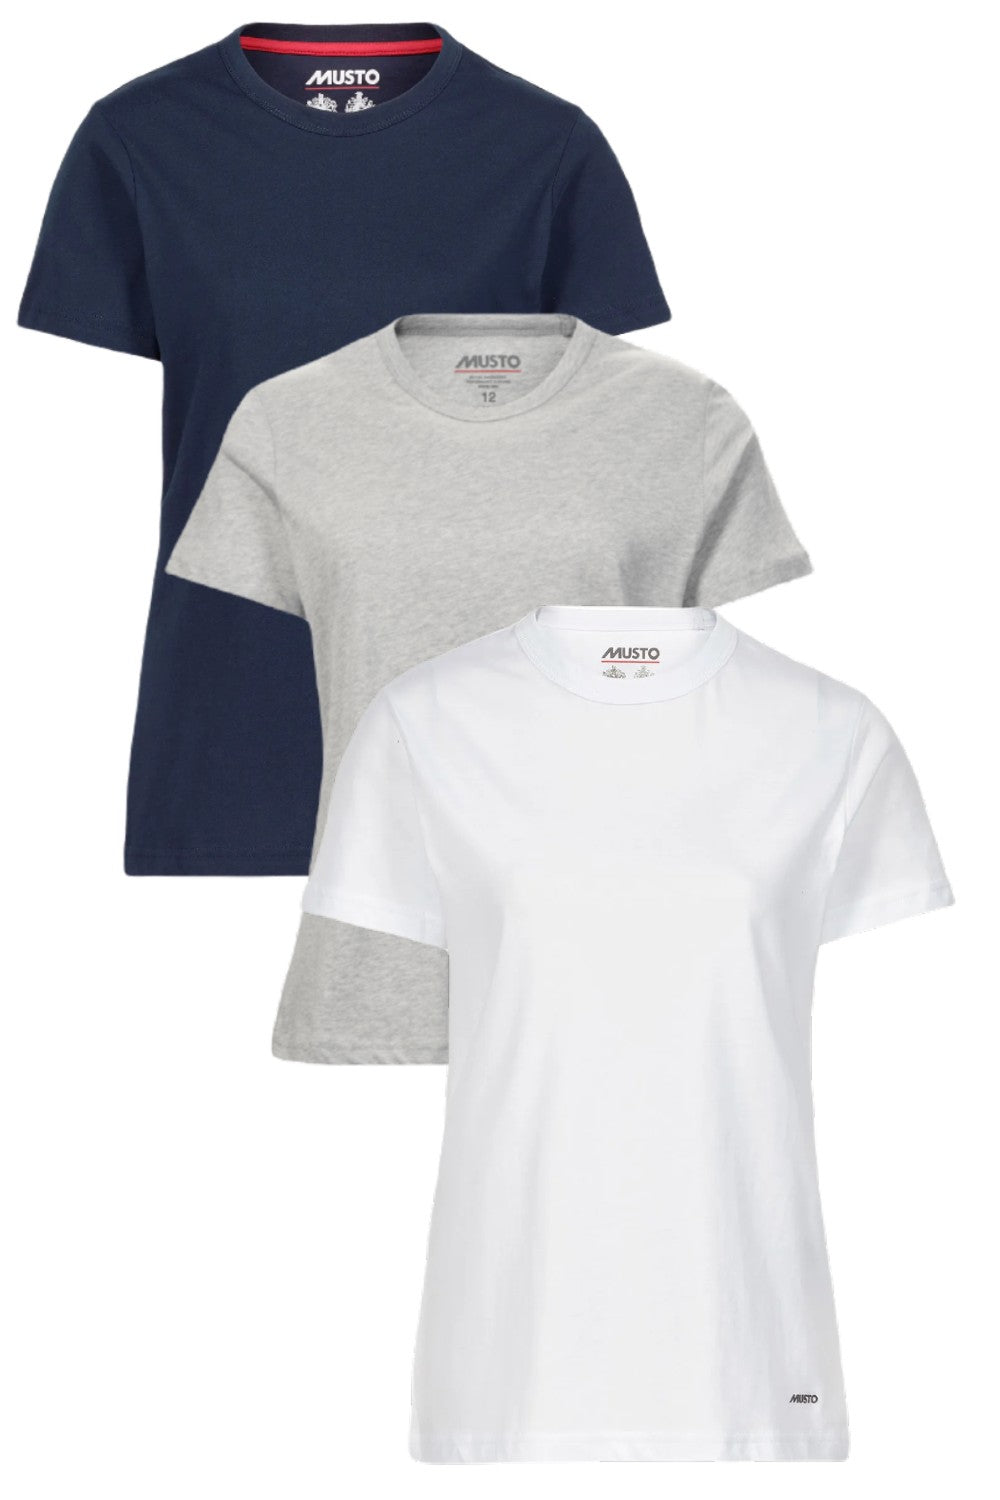 Musto Womens Essentials T-Shirt In Navy, Grey Melange and White